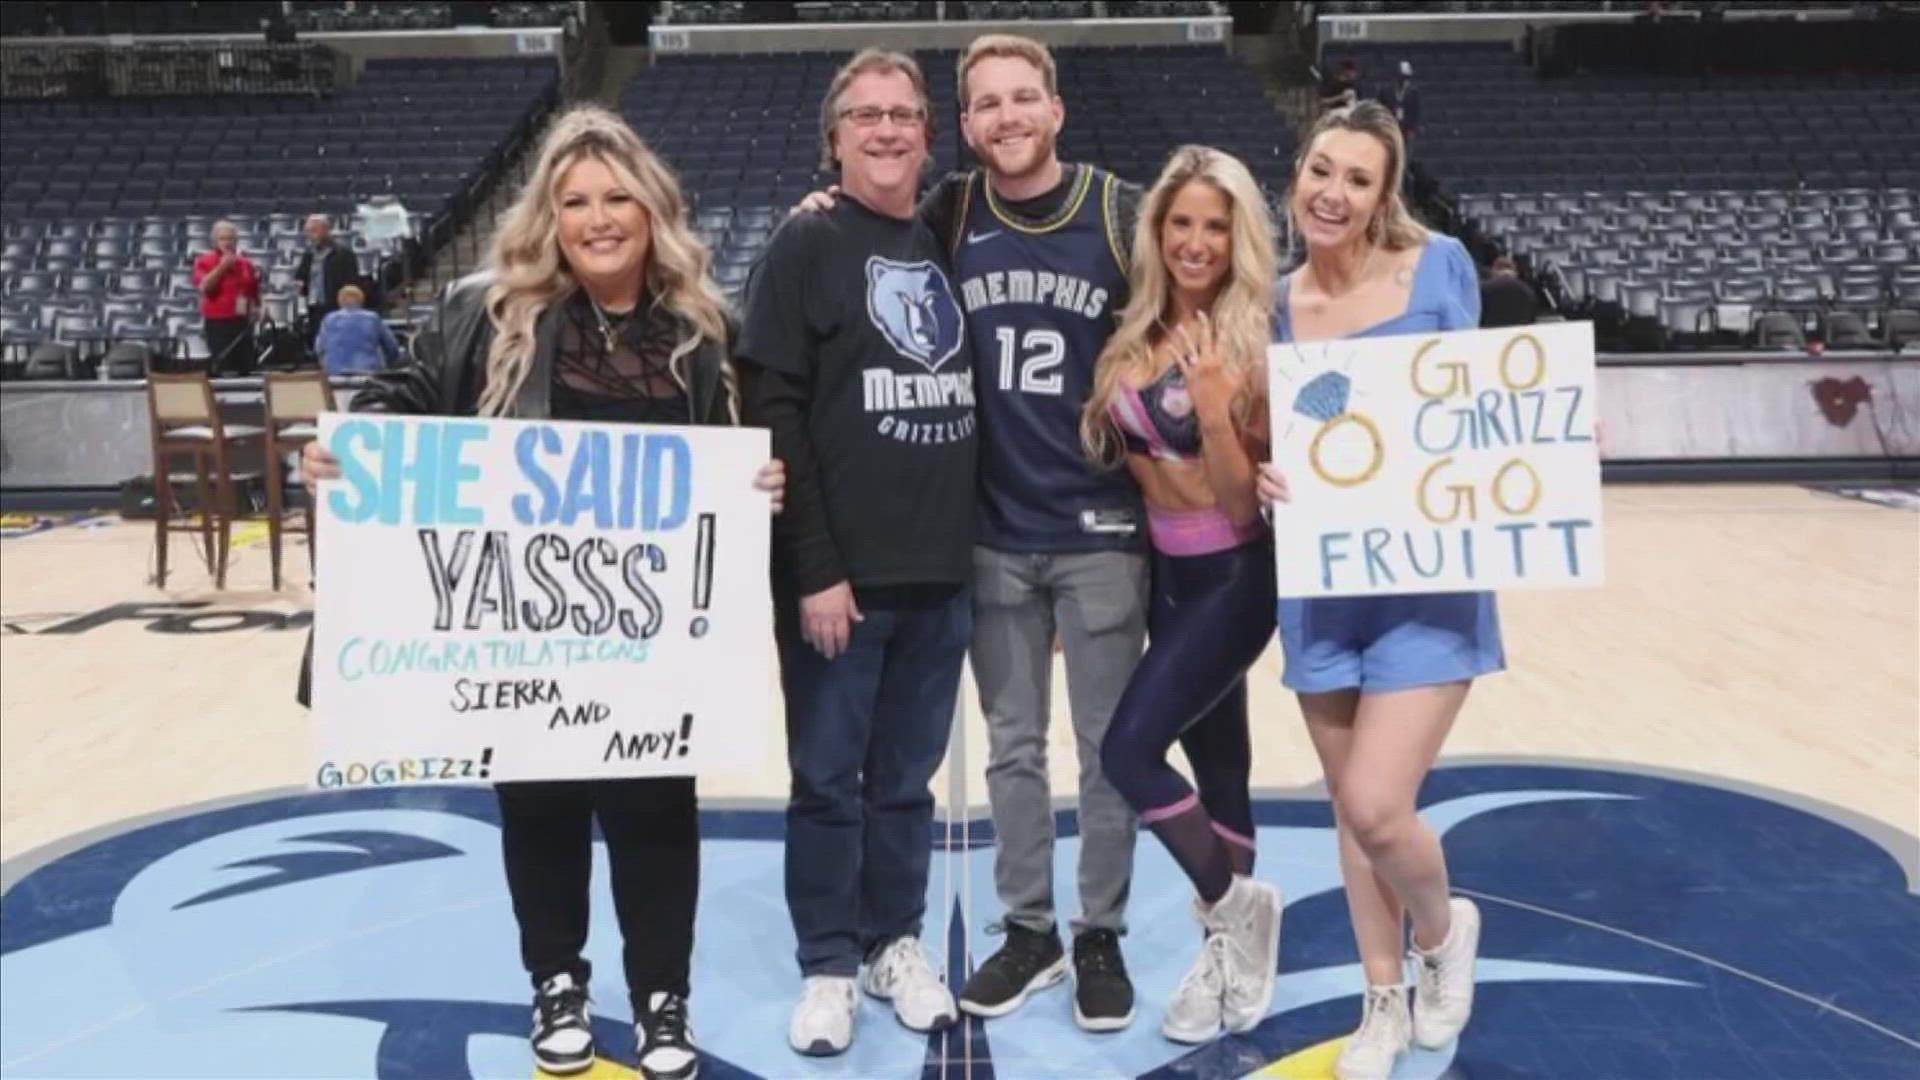 Sierra was shocked when her fiancé popped the question during Game 5 of the Timberwolves-Grizzlies series